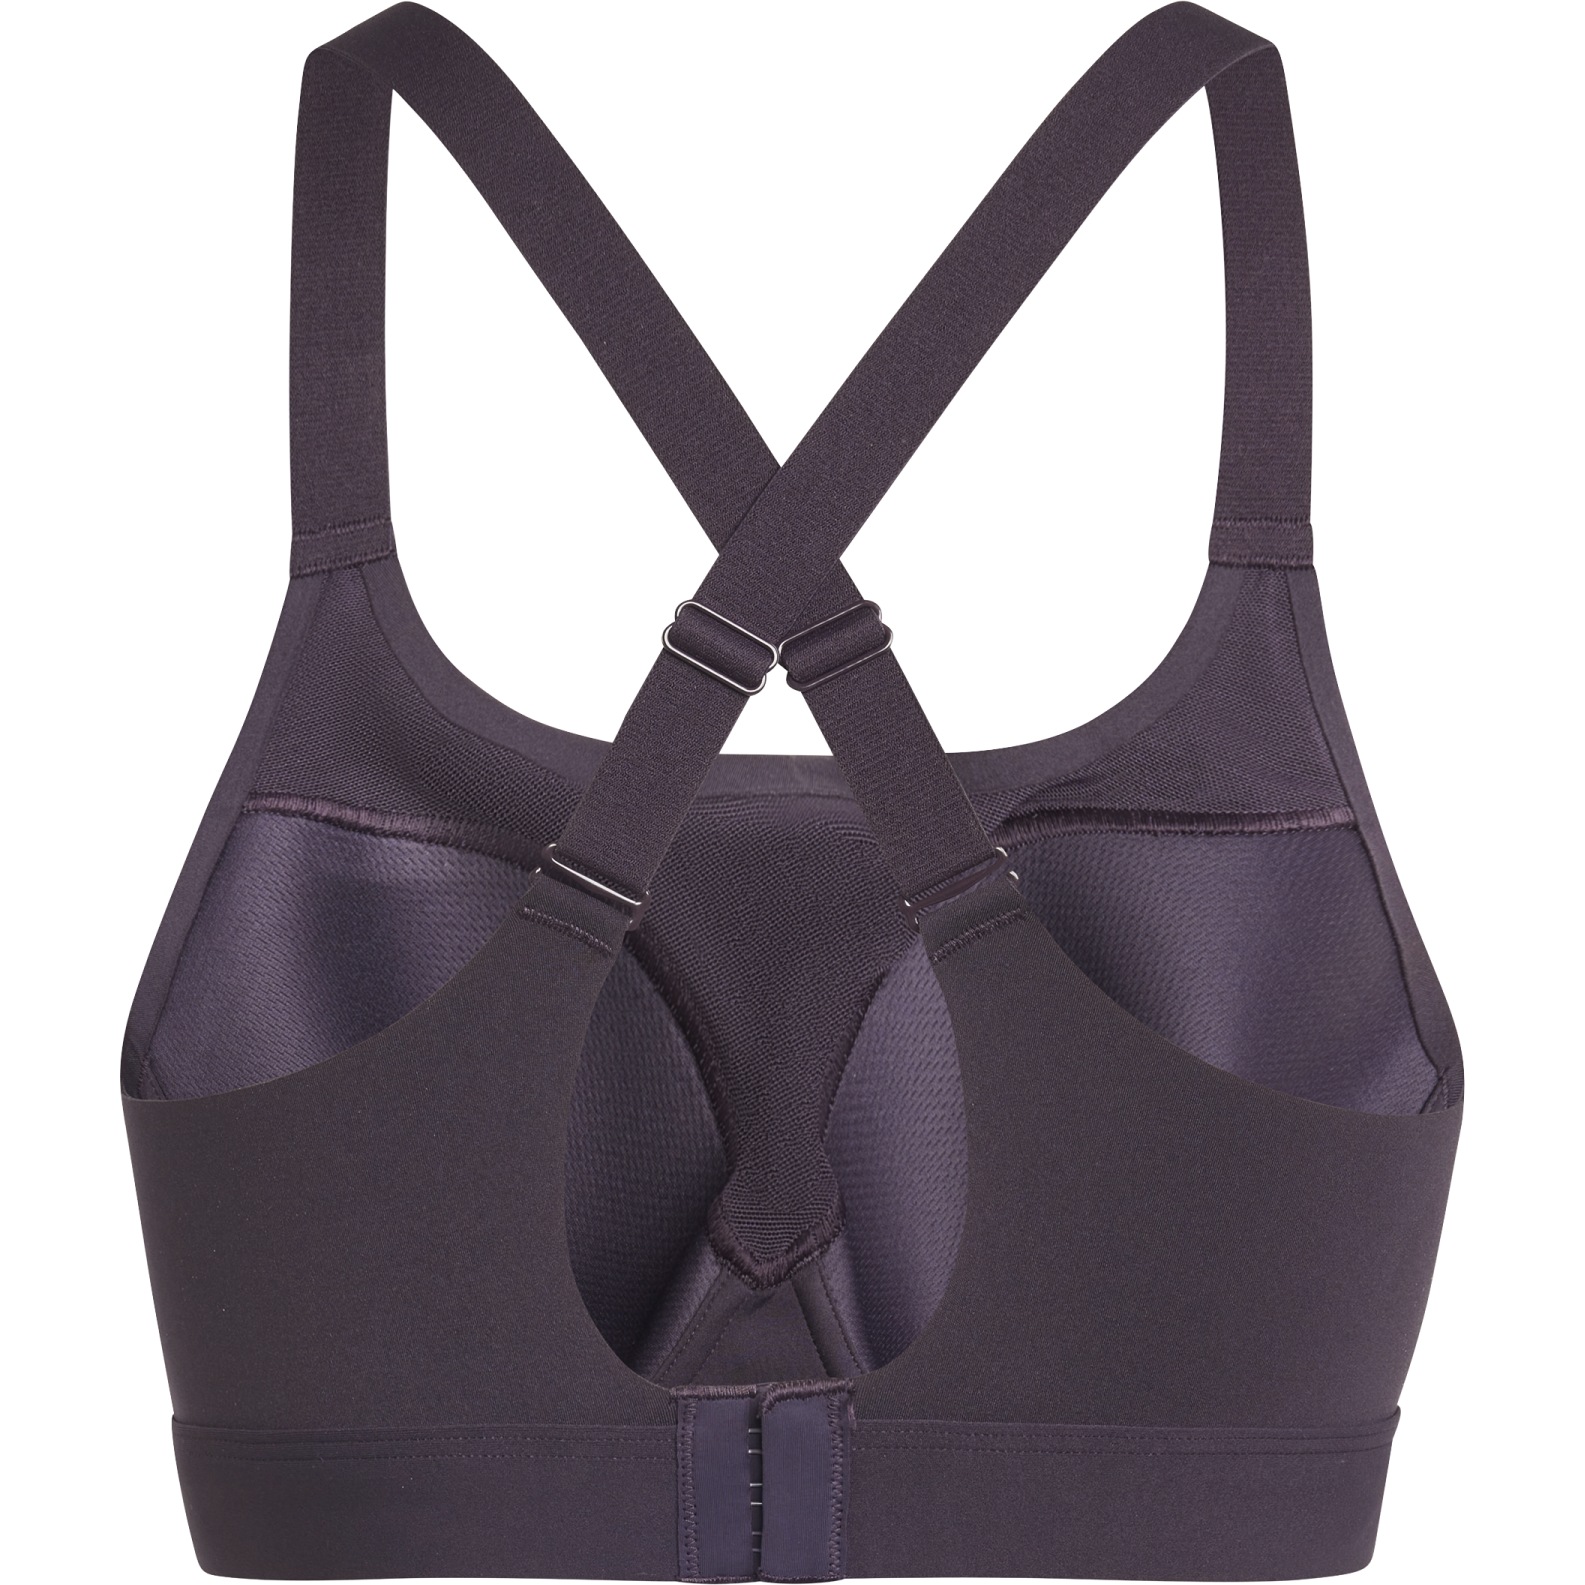 TLRD Impact Luxe High Support Sports Bra, Adidas